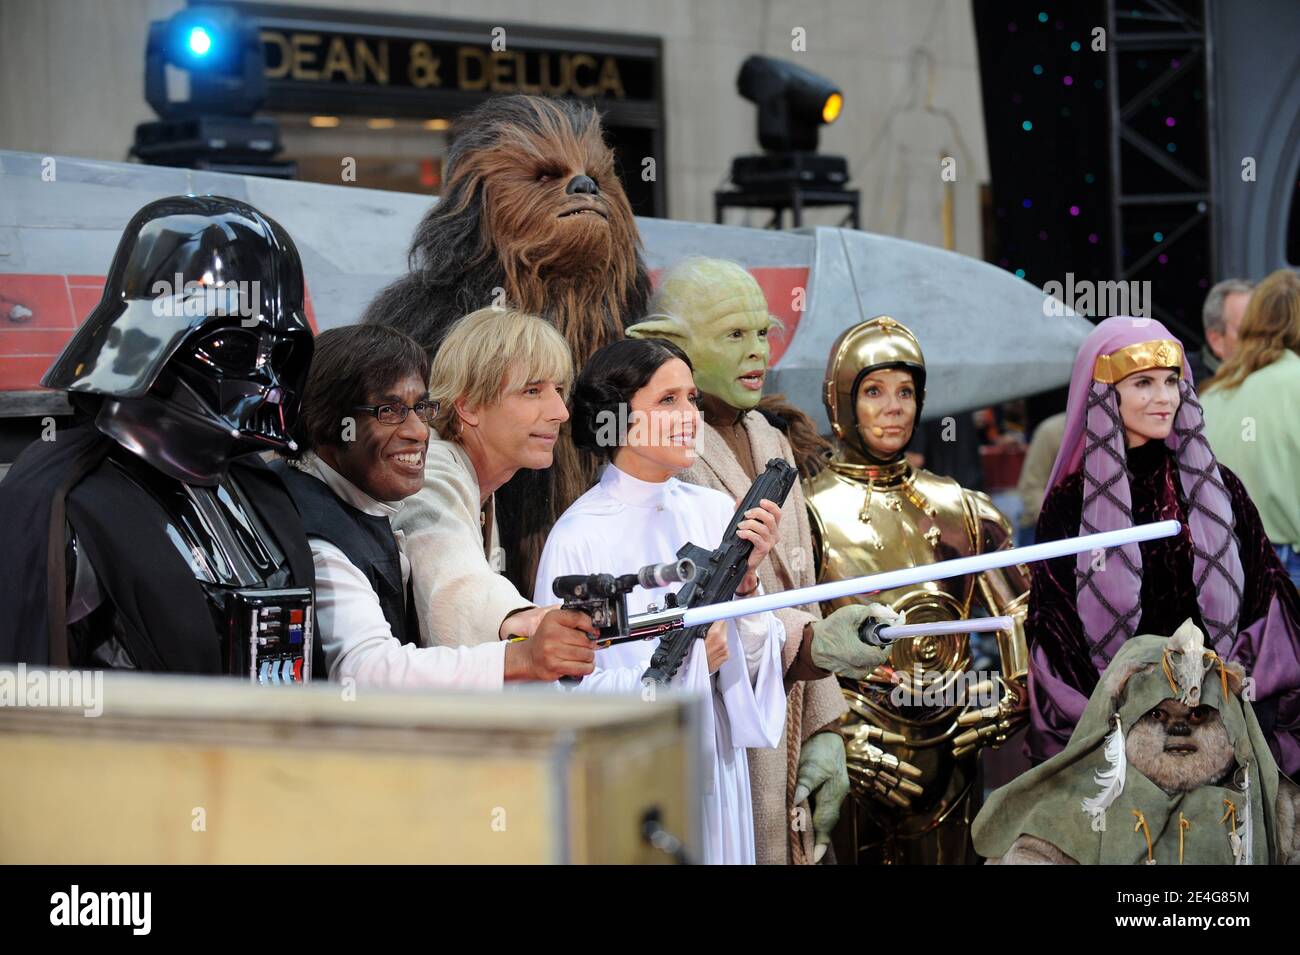 Ann Curry as Darth Vader, Al Roker as Han Solo, Matt Lauer as Luke Skywalker, Meredith Vieira as Princess Leia, Hoda Kotb as Yoda, Kathie Lee Gifford as C-3PO and Natalie Morales as Queen Amidala during the Halloween Celebration of the Today Show in New York City, NY, USA on October 30, 2009. Photo by Mehdi Taamallah/ABACAPRESS.COM Stock Photo